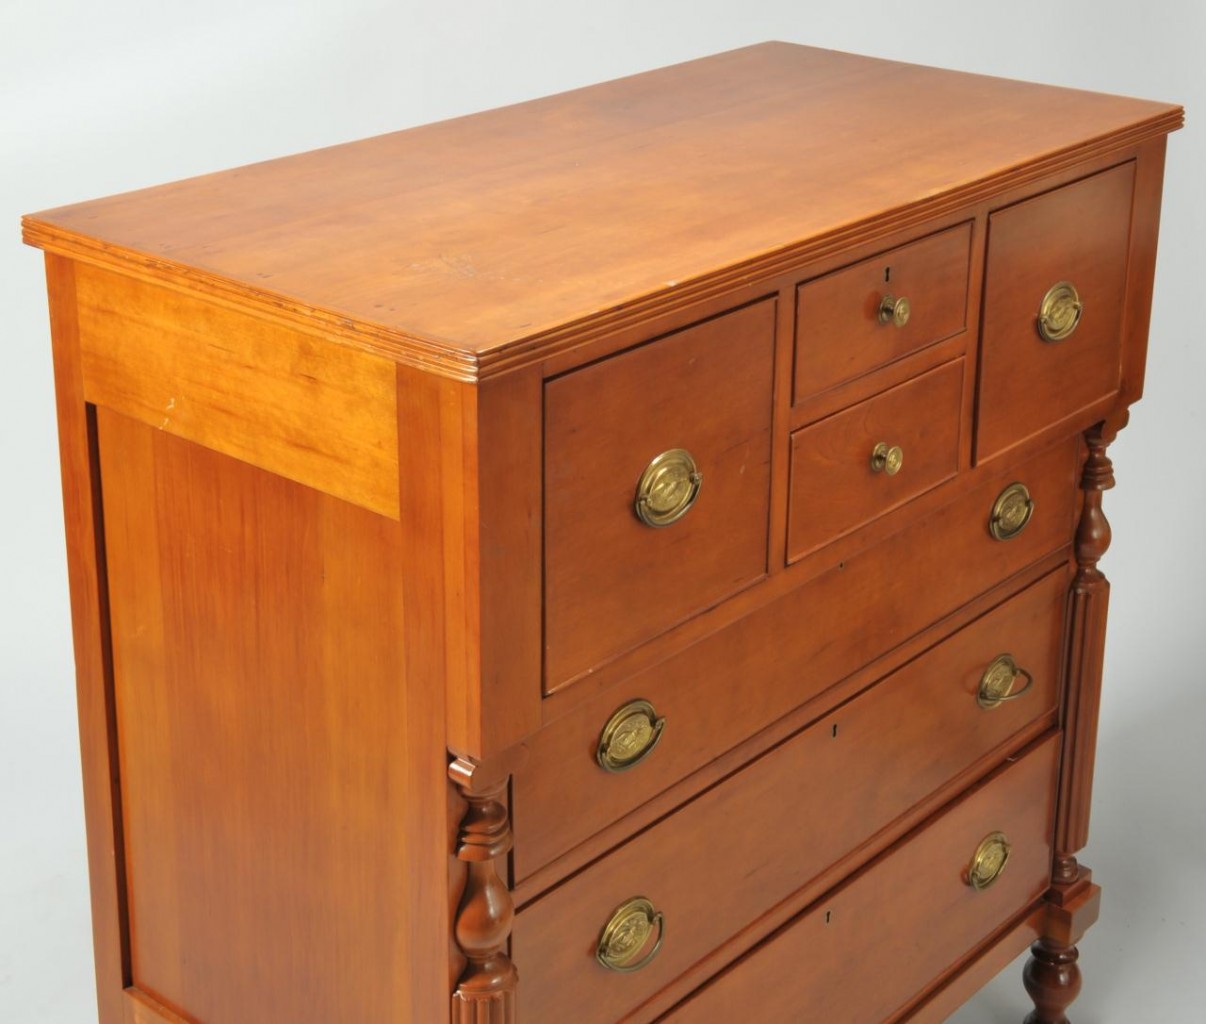 Lot 545: Signed Indiana River Trade Cherry Bonnet Chest